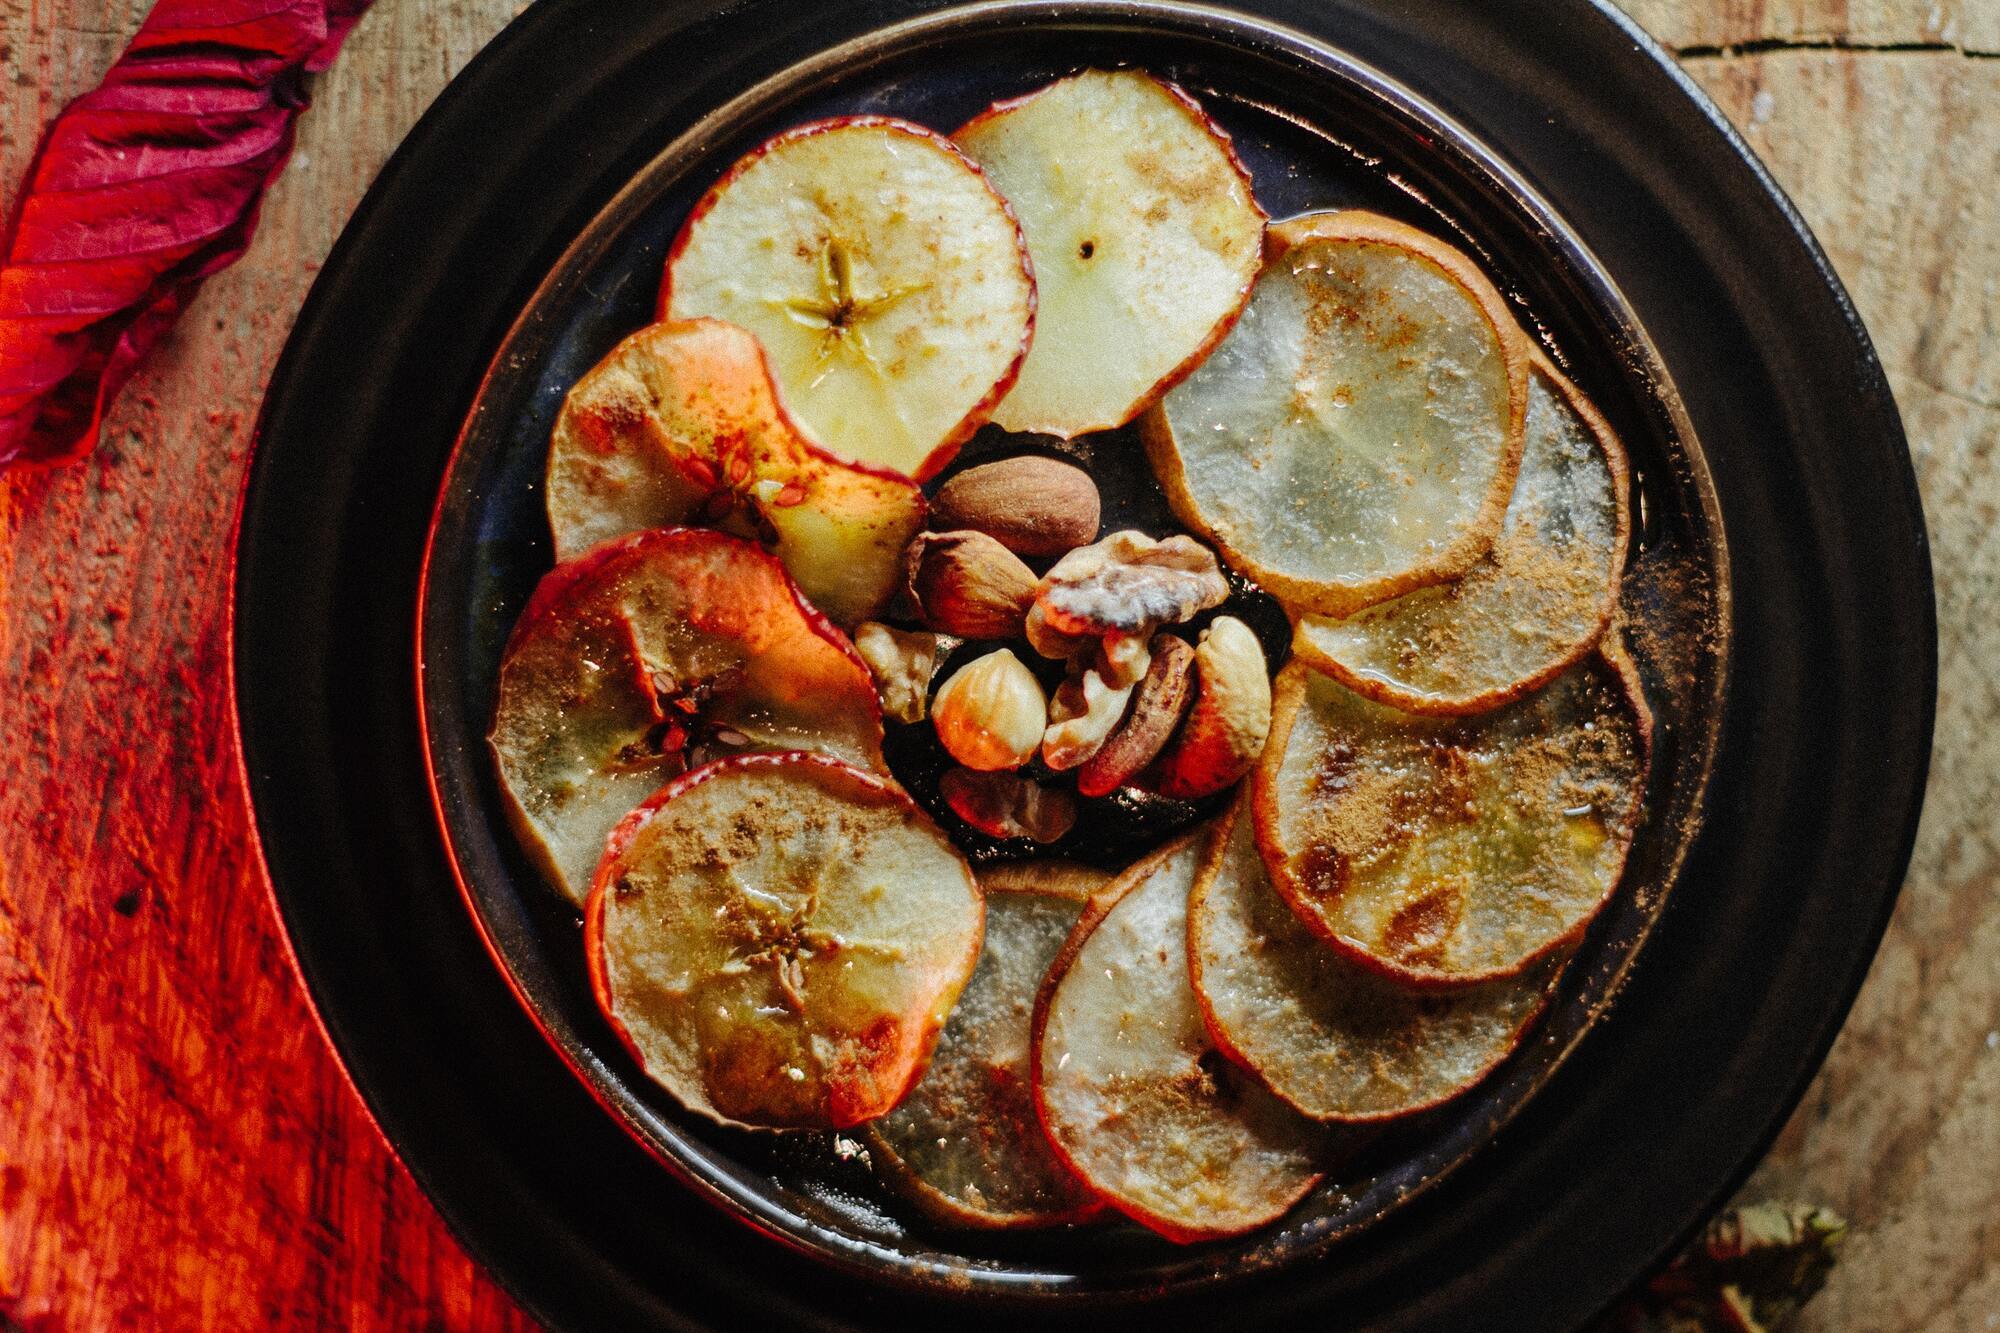 Dried fruits can be added to various dishes